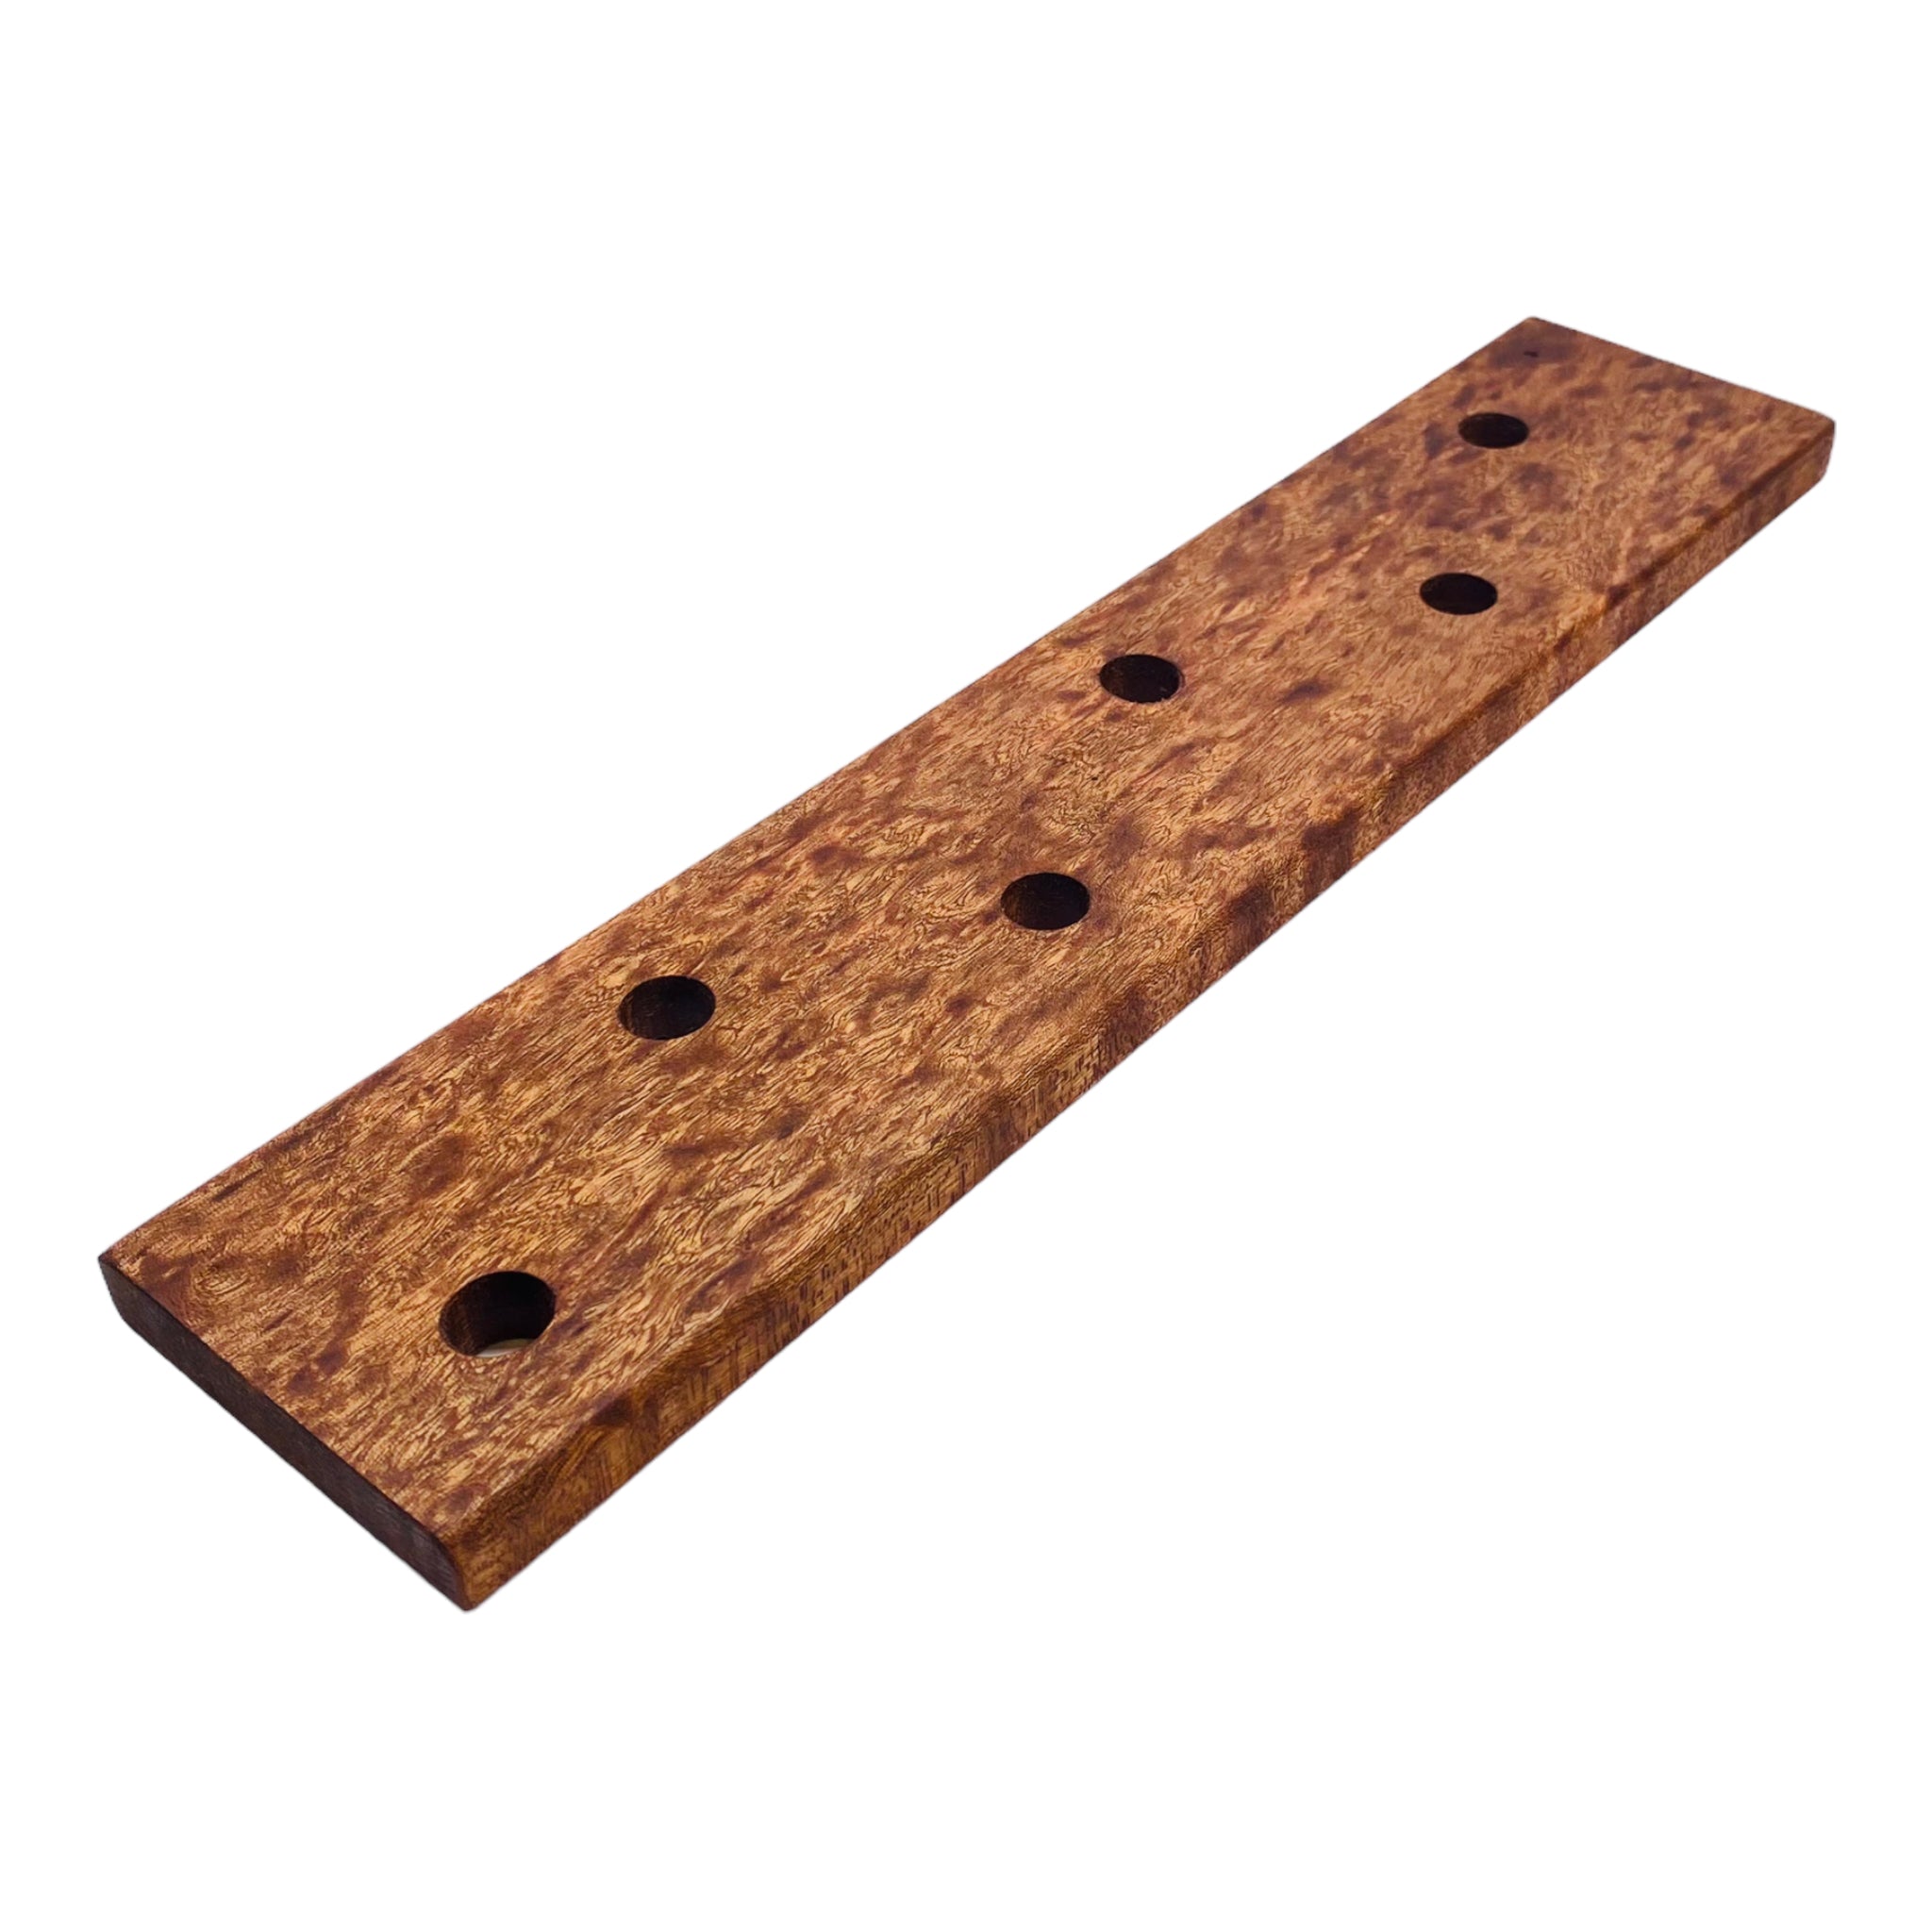 6 Hole Wood Display Stand Holder For 14mm Bong Bowl Pieces Or Quartz Bangers - Mahogany Lace Burl